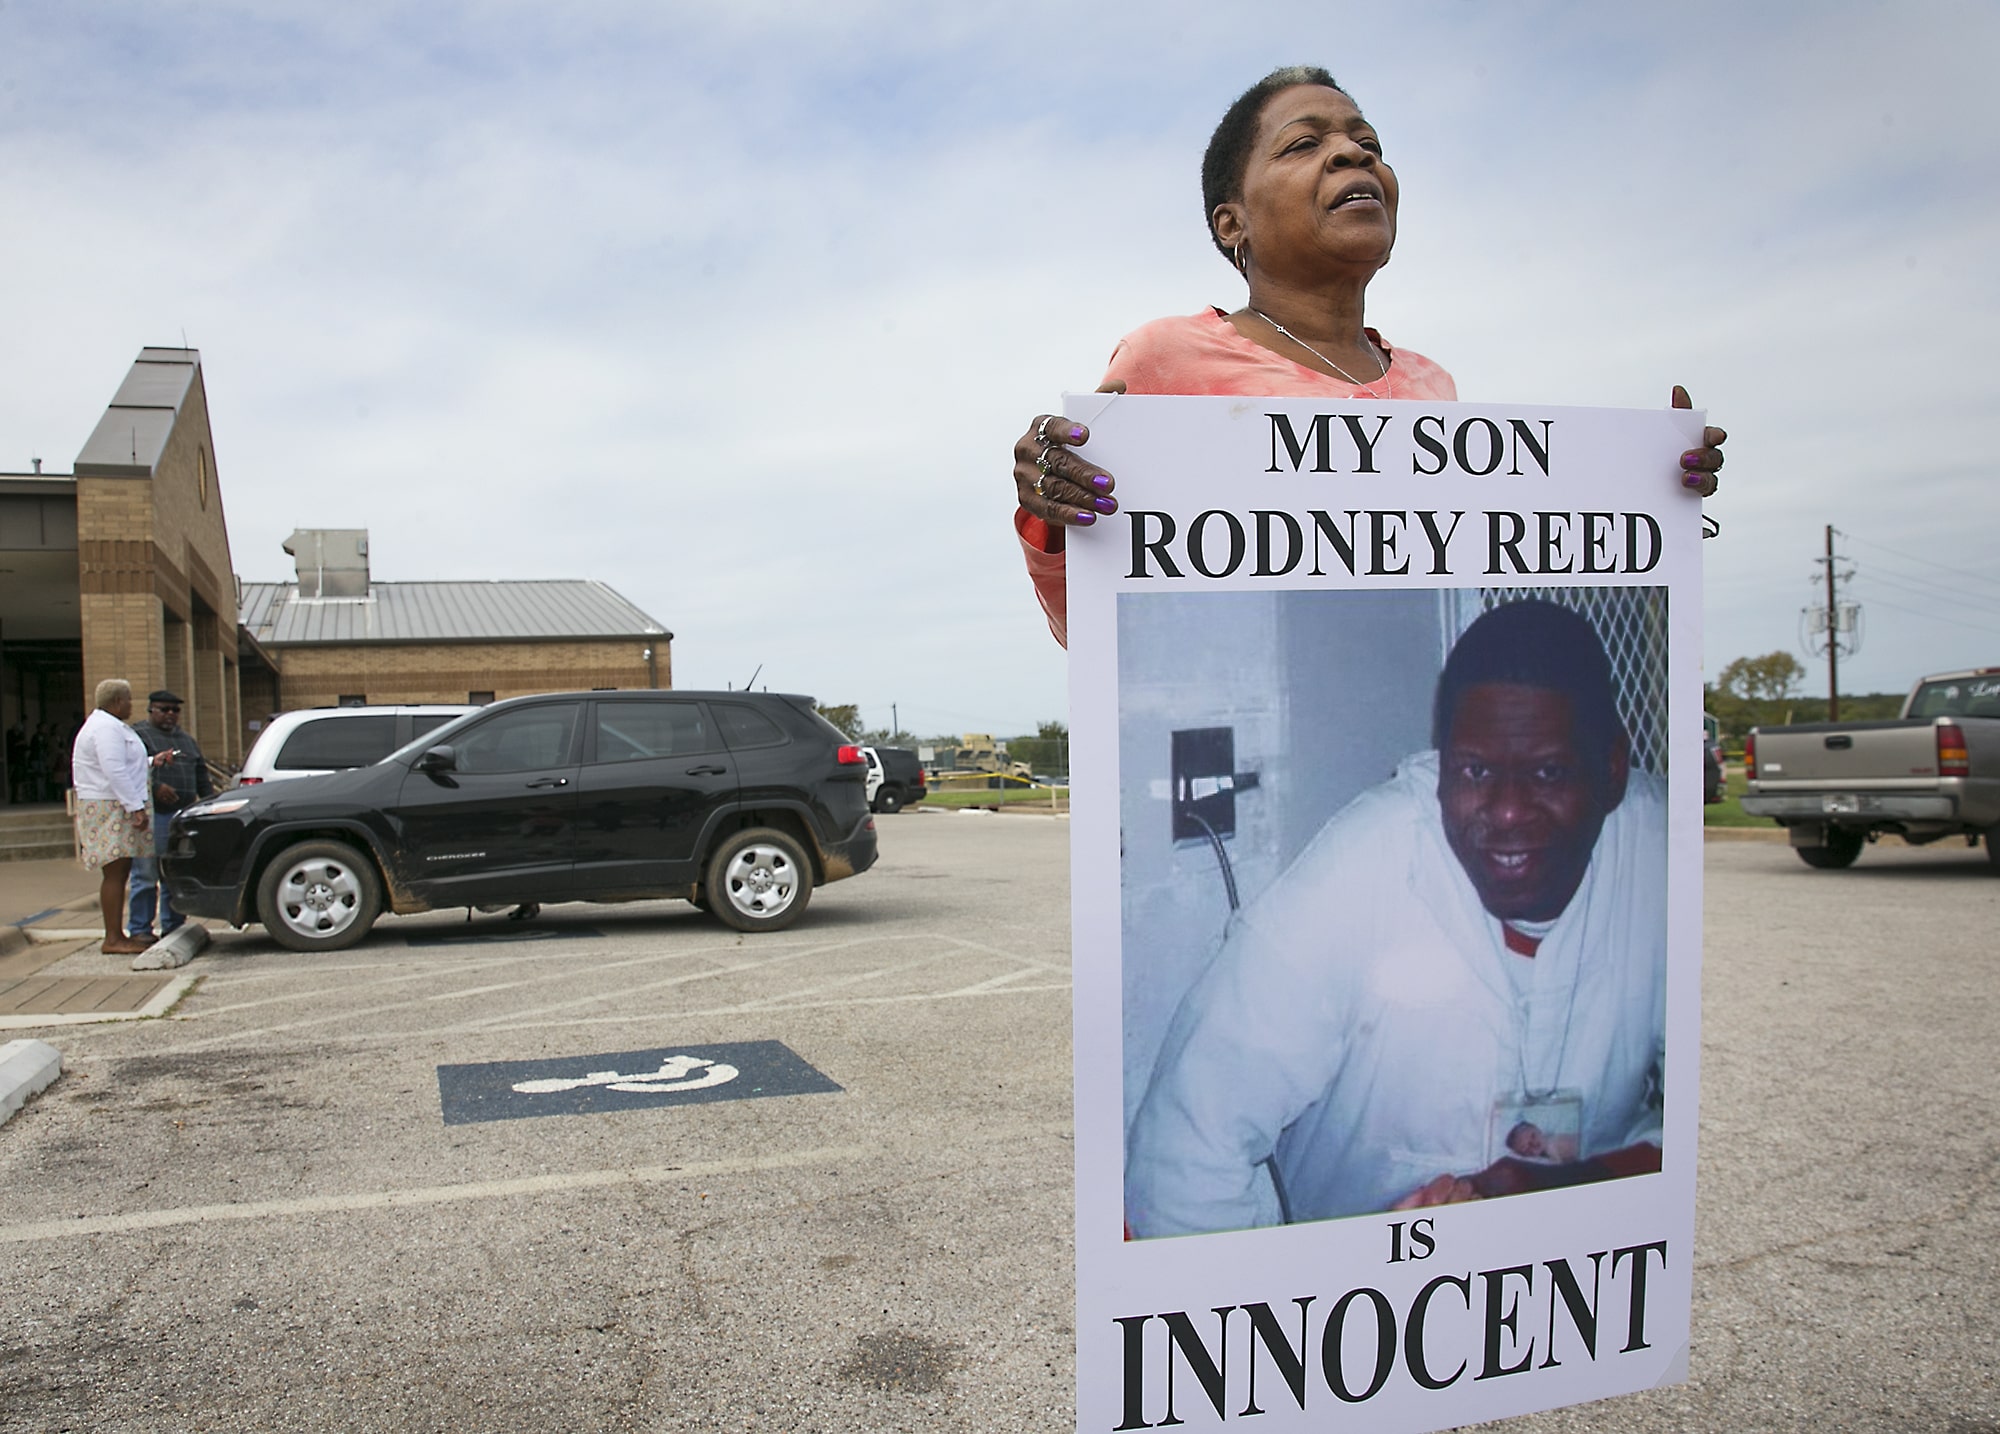 10 Facts About Rodney Reed’s Case You Need to Know